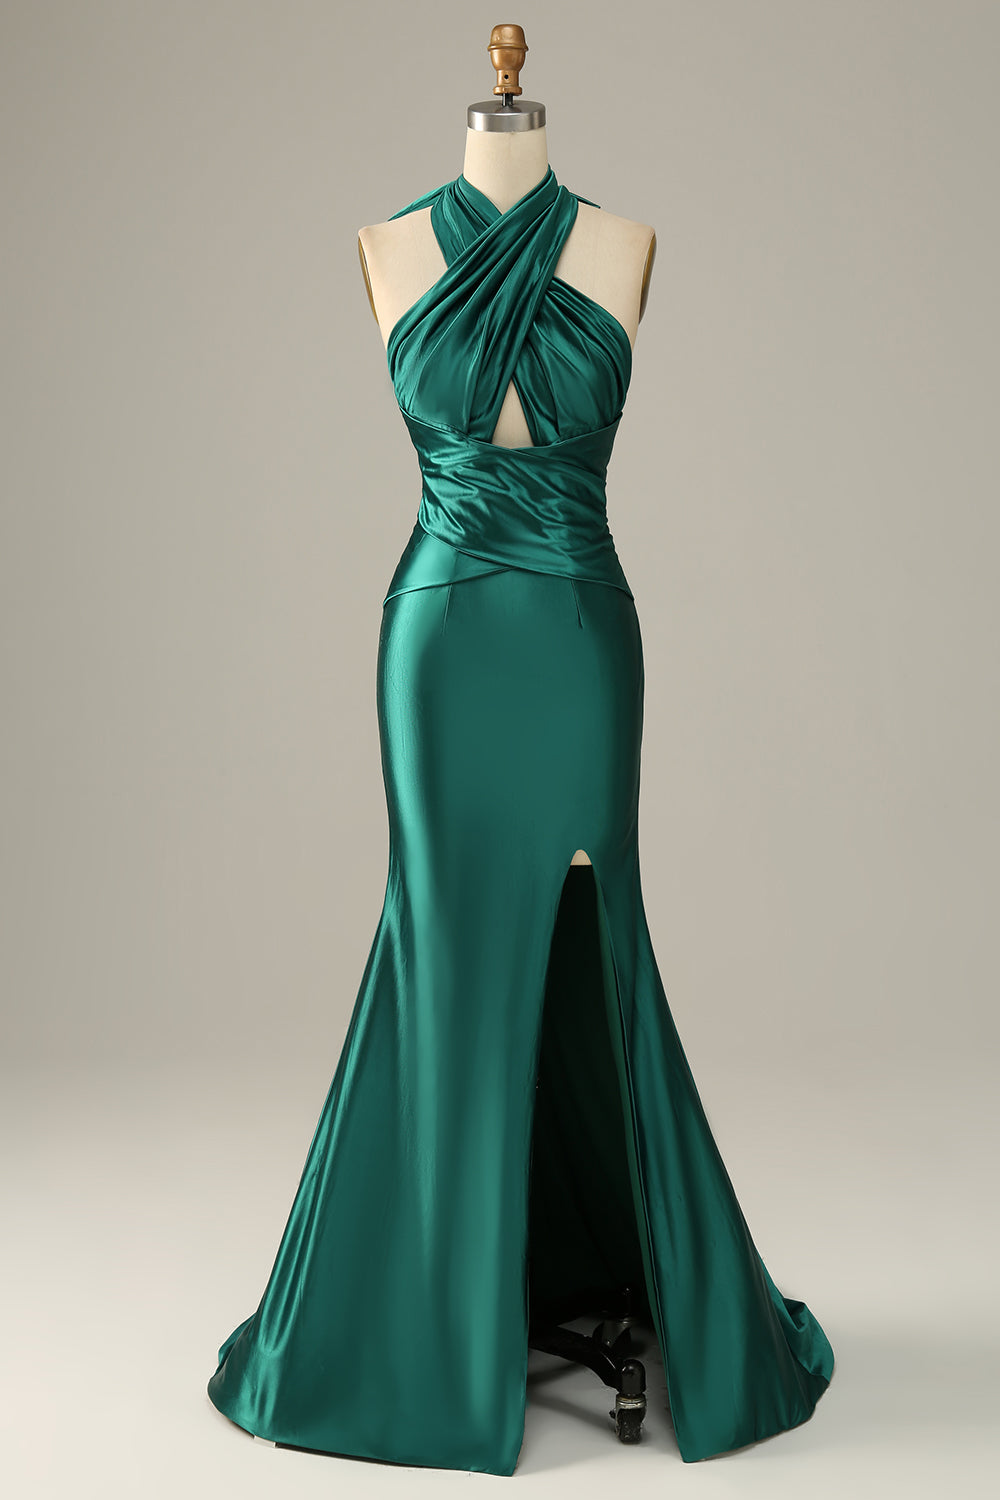 Dark Green Halter Convertible Lace Up Mermaid Corset Prom Corset Bridesmaid Dress With Slit Gowns, Bridesmaid Dresses Wedding